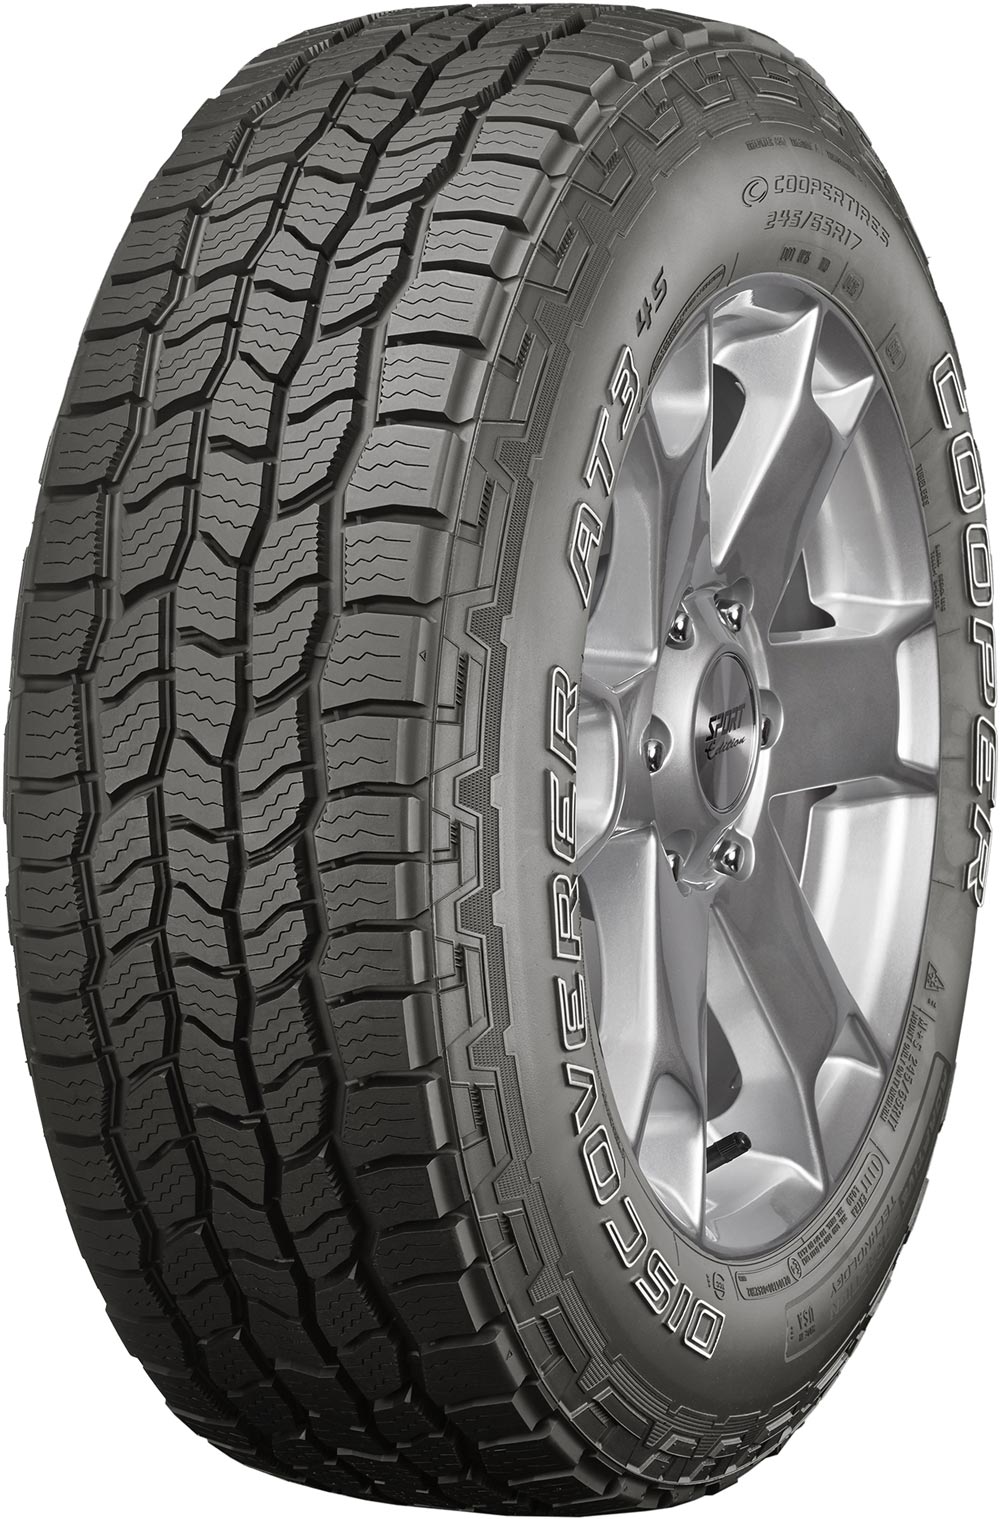 Гуми за джип COOPER DISCOVERER AT3 4S OWL 265/70 R16 112T